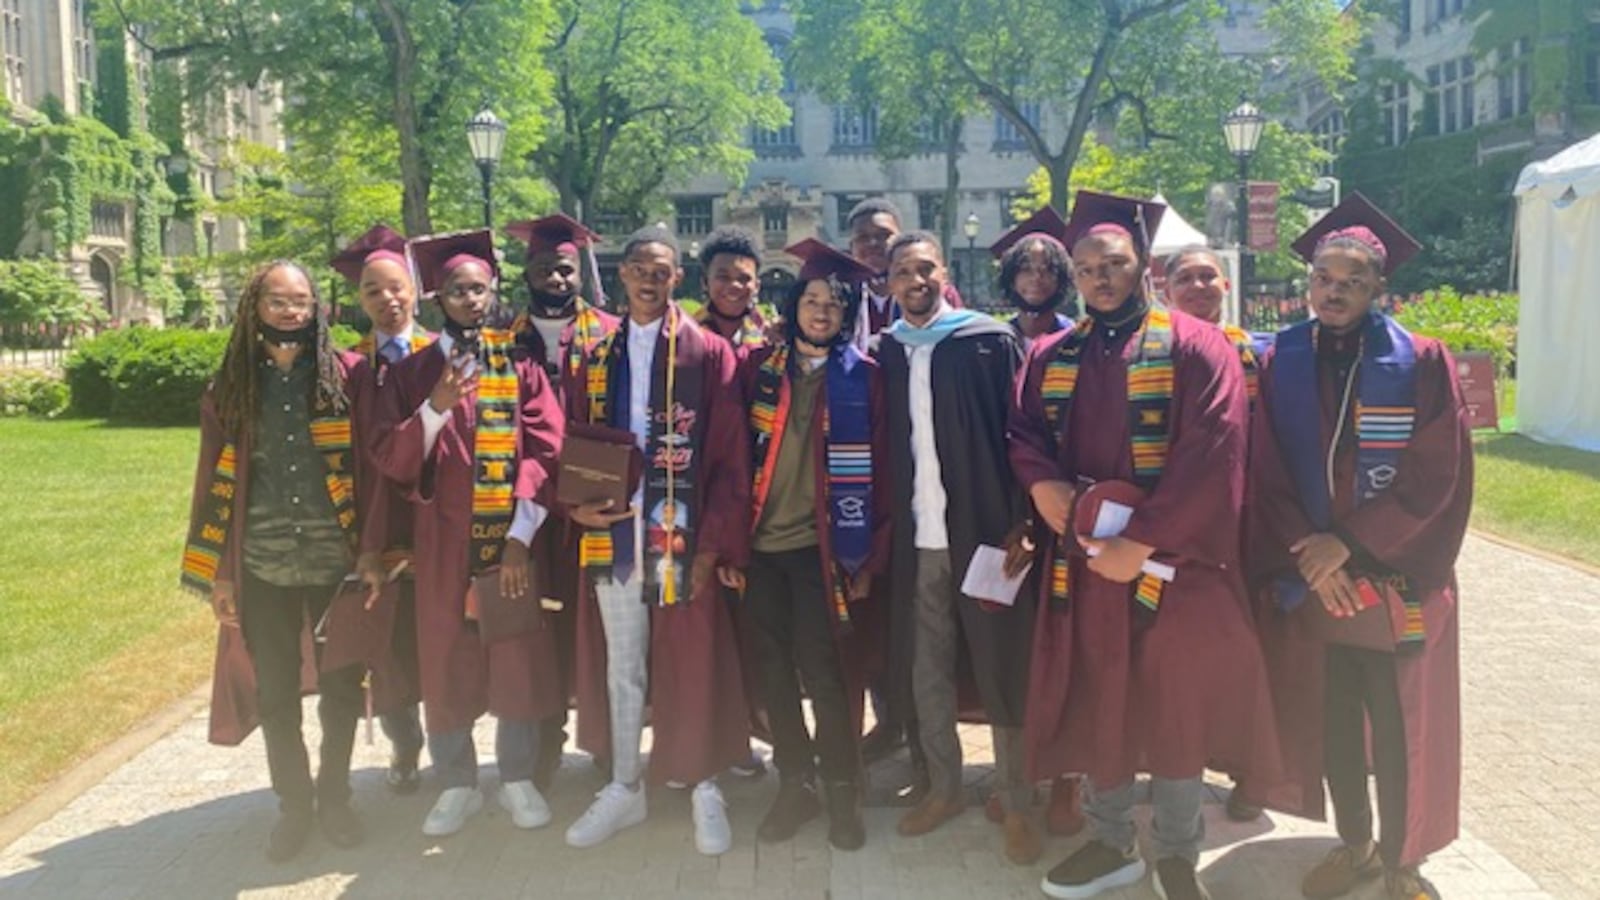 A group of high school graduates, all young Black men, wear maroon caps and gowns. They stand together with their mentor.